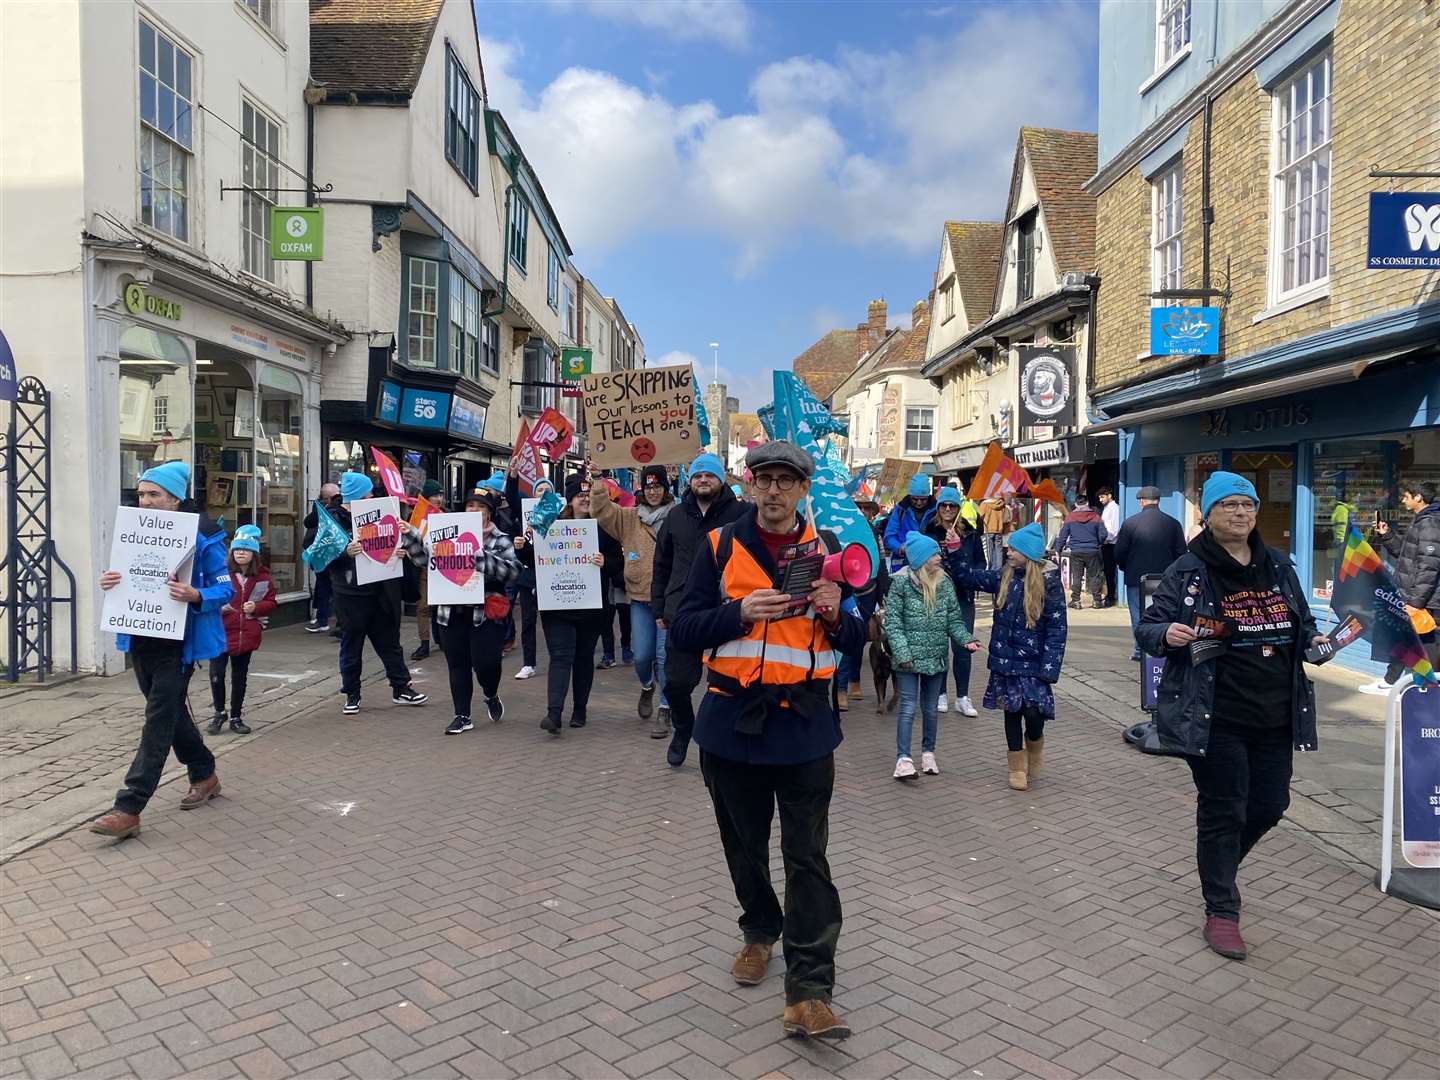 Protesters marching through the centre of Canterbury earlier today